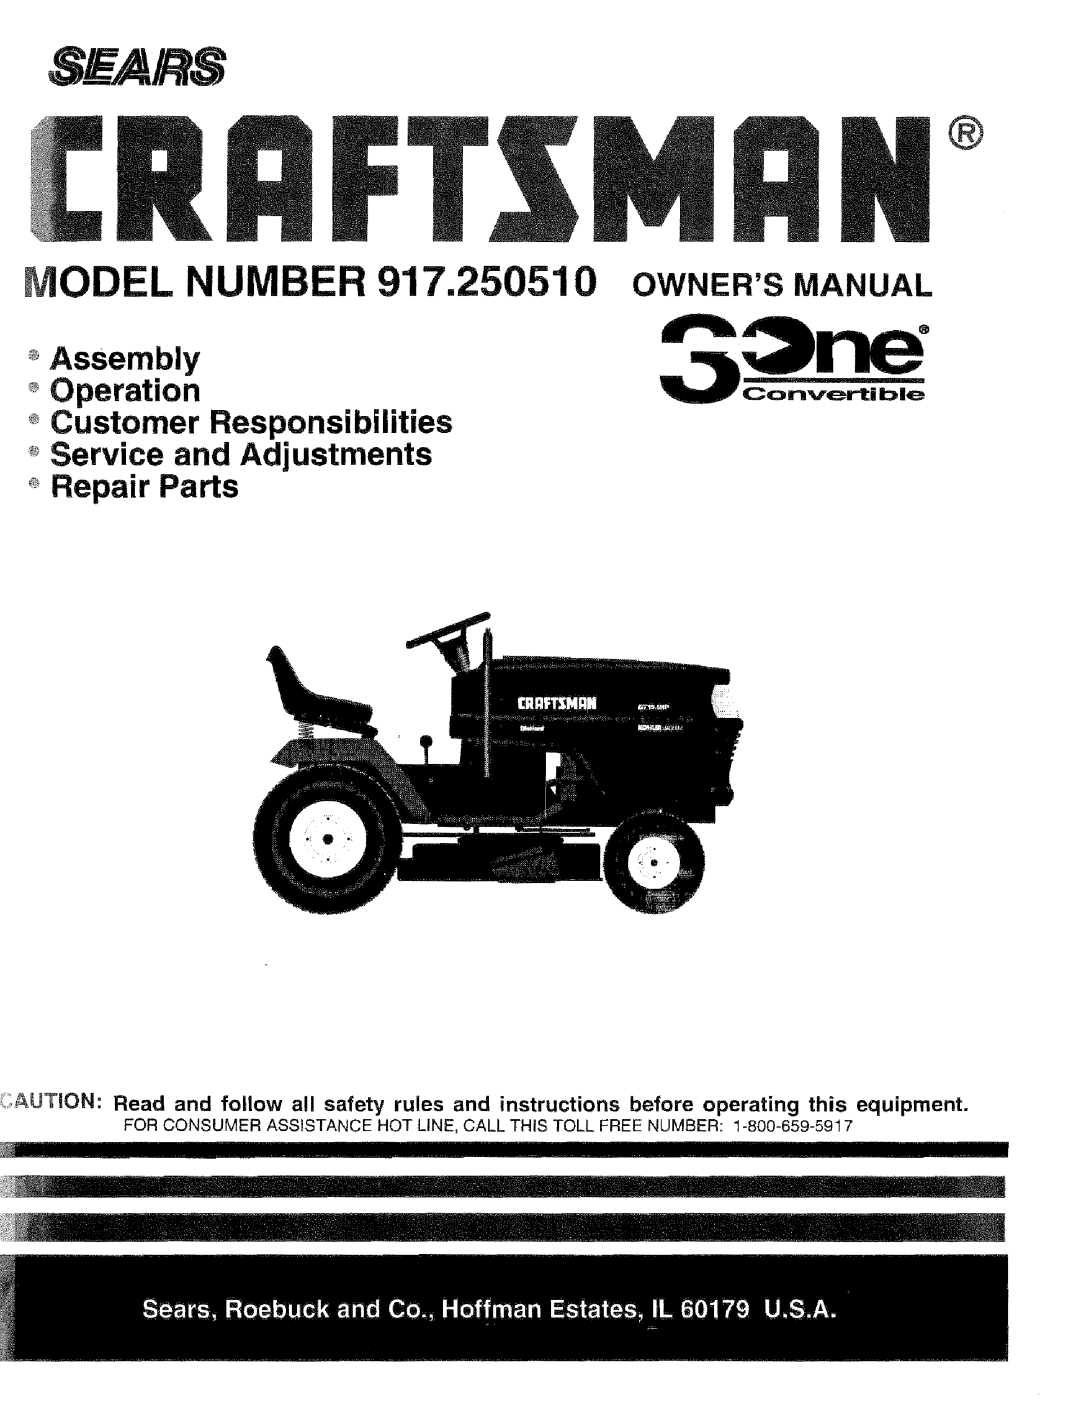 Sears manual NUMBER 917.250510 OWNERS MANUAL, _ Assembly Operation _ Customer Responsibilities, Convertible 